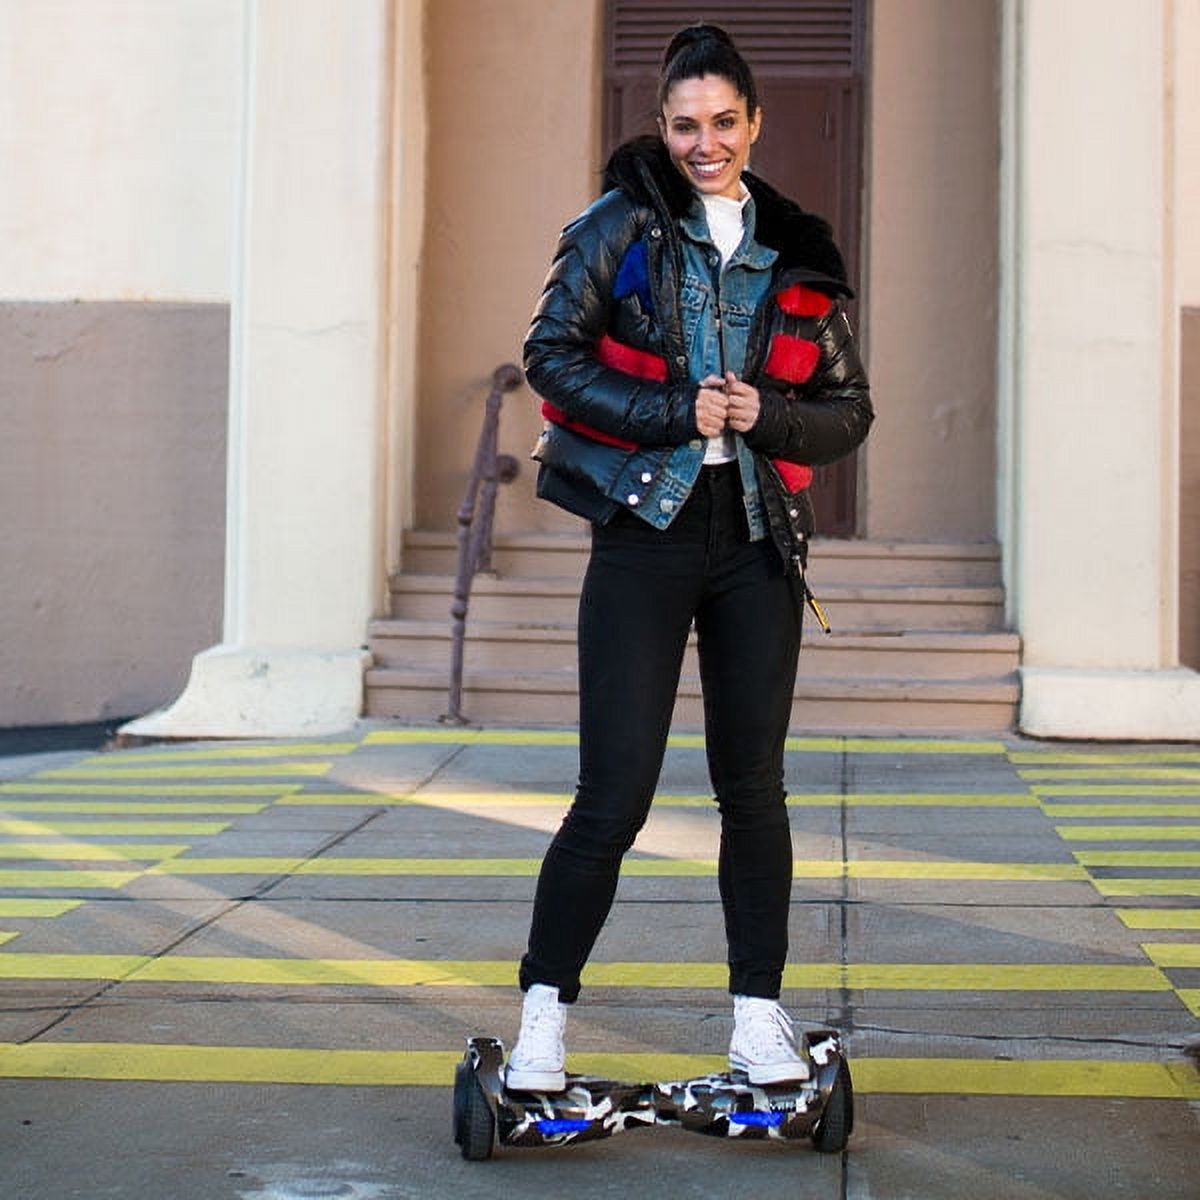 Hover-1 Helix UL Certified Electric Hoverboard, 6.5in LED Wheels, Bluetooth Speaker, Gunmetal Gray - image 3 of 8